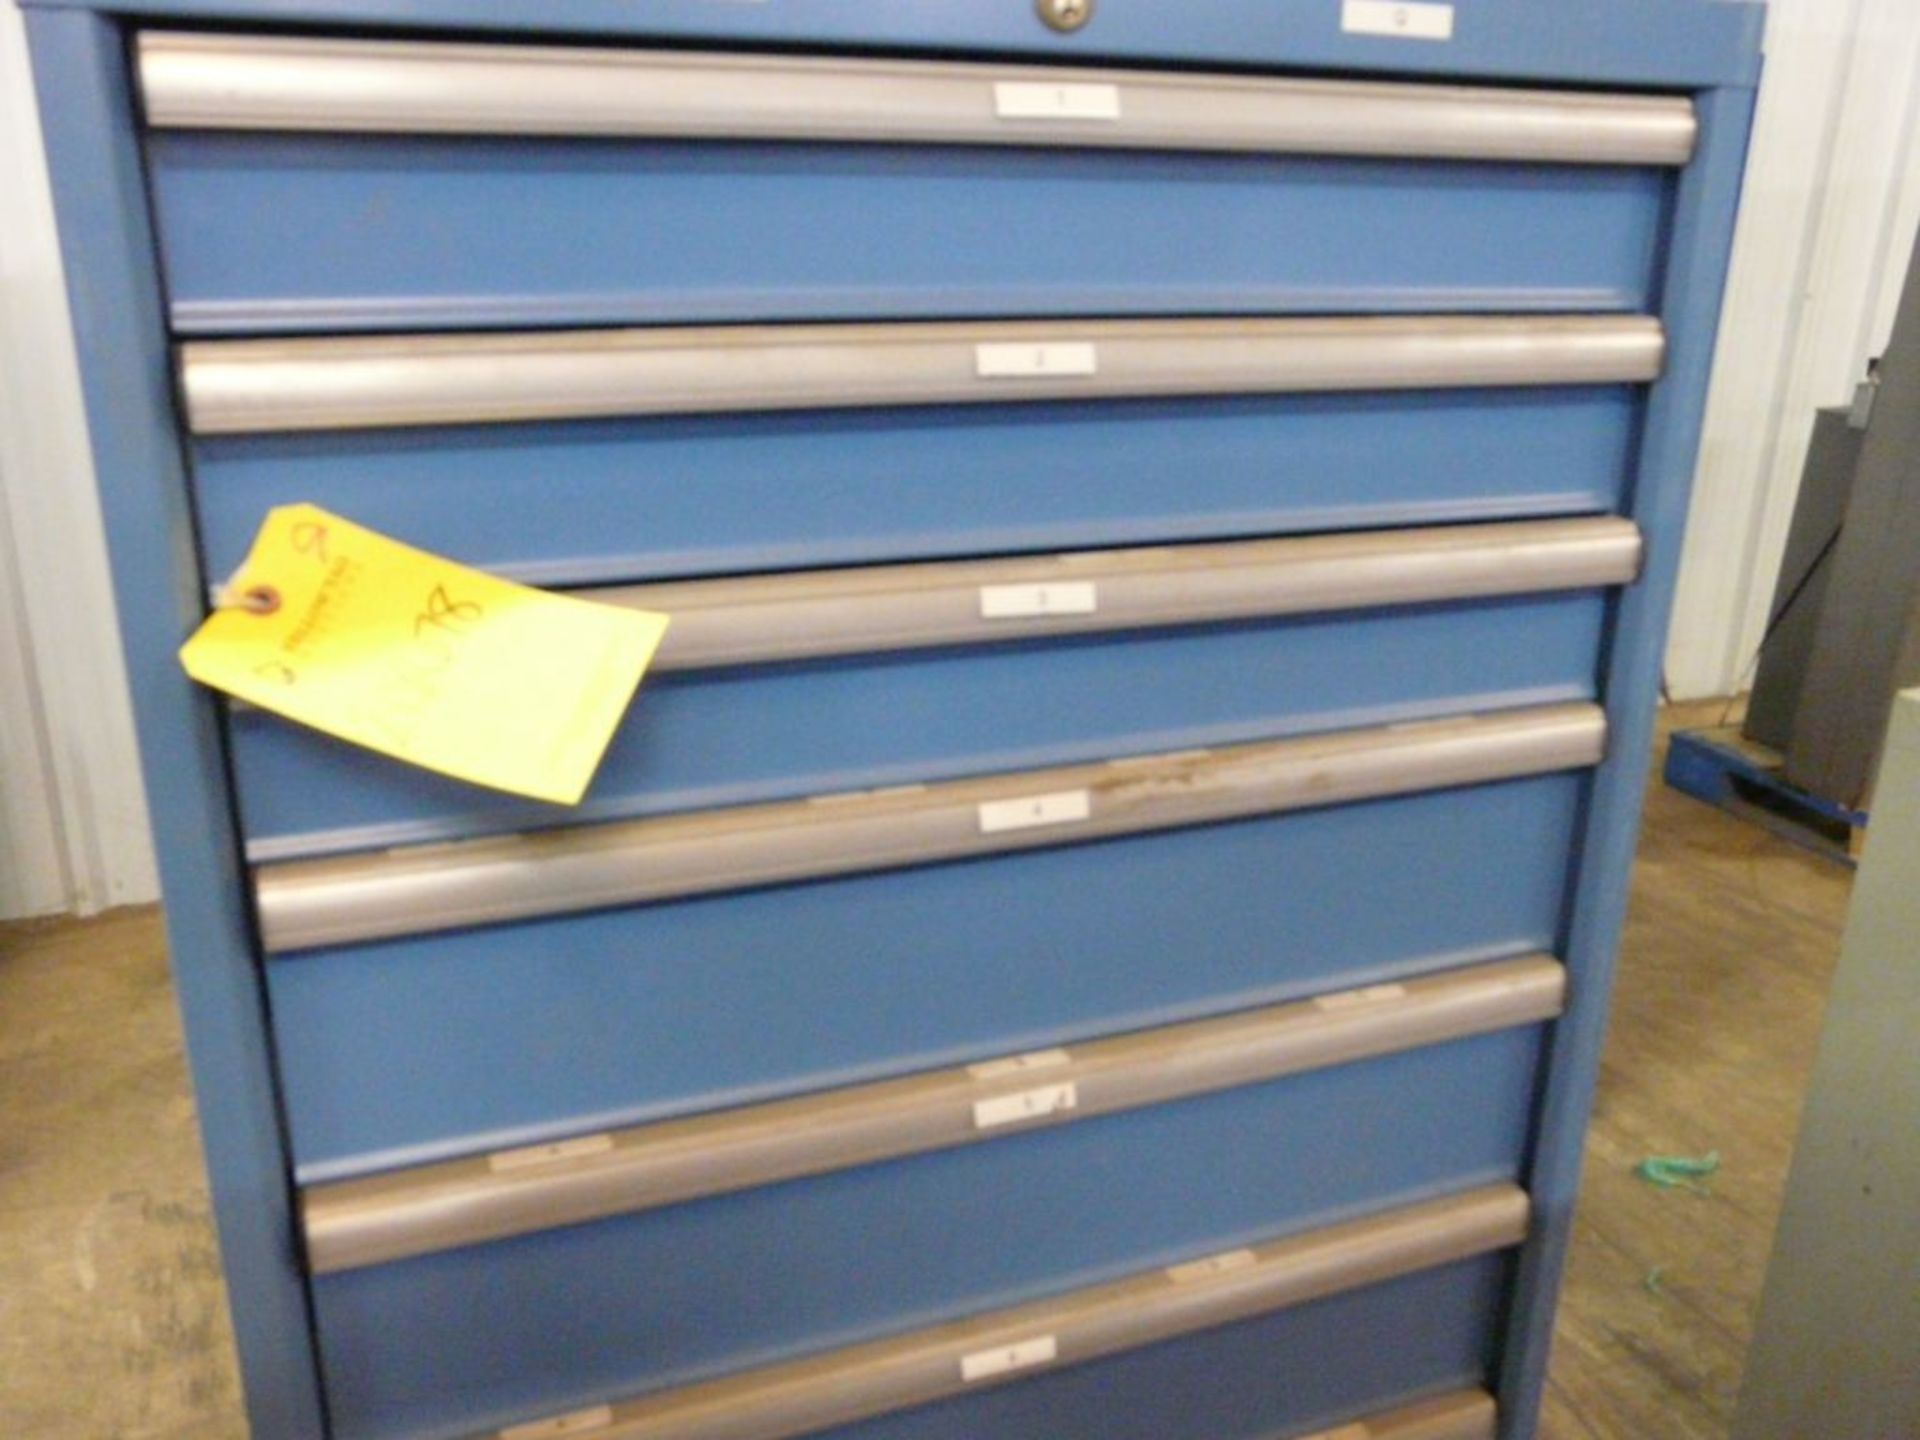 Lista 9-Drawer Cabinet - 28-1/2"W x 28-1/2"L x 59"H; Tag: 218678 - Image 3 of 6